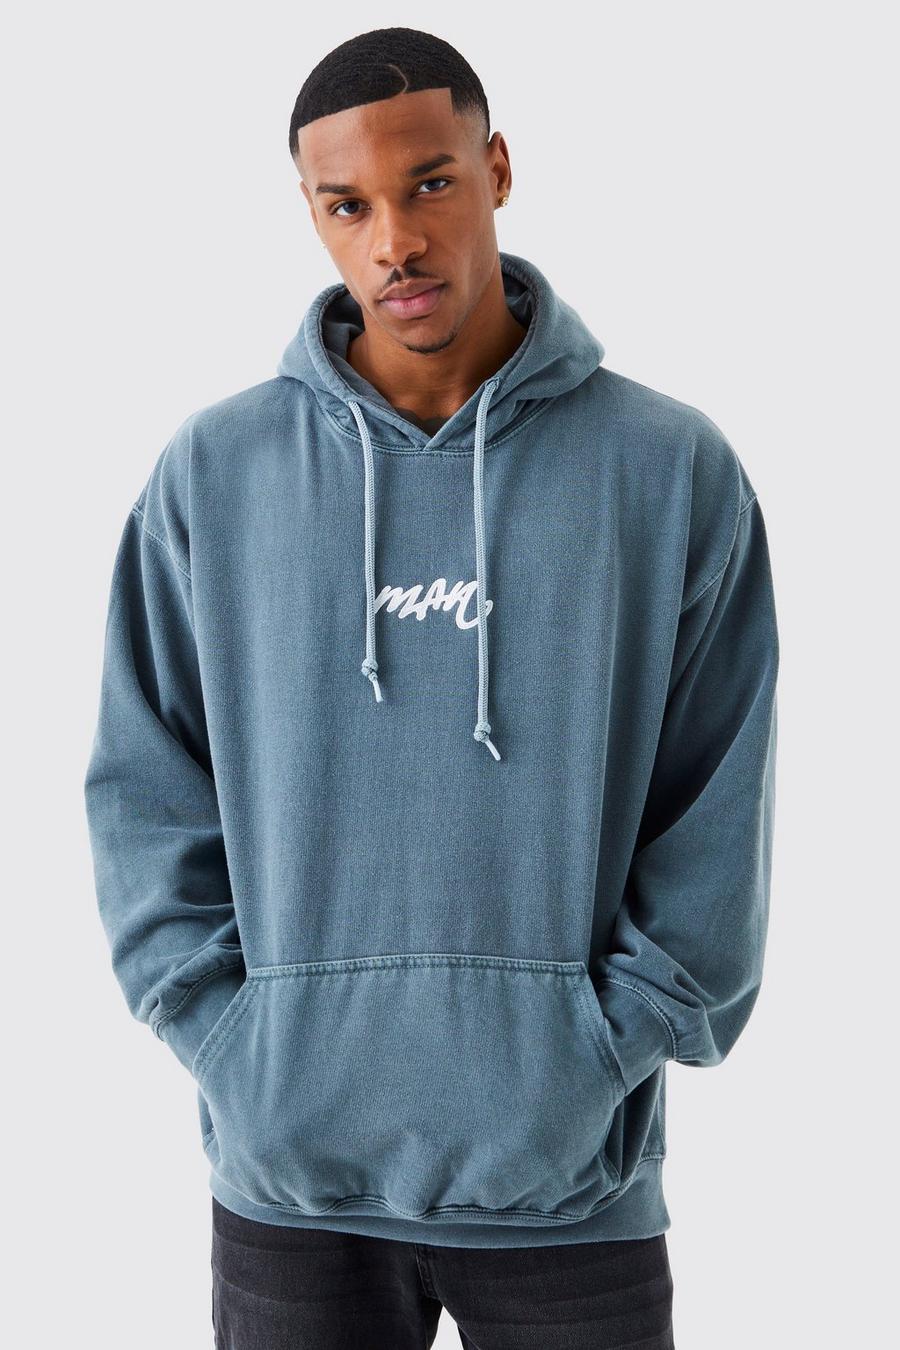 Charcoal grey Oversized Washed Embroidered Hoodie